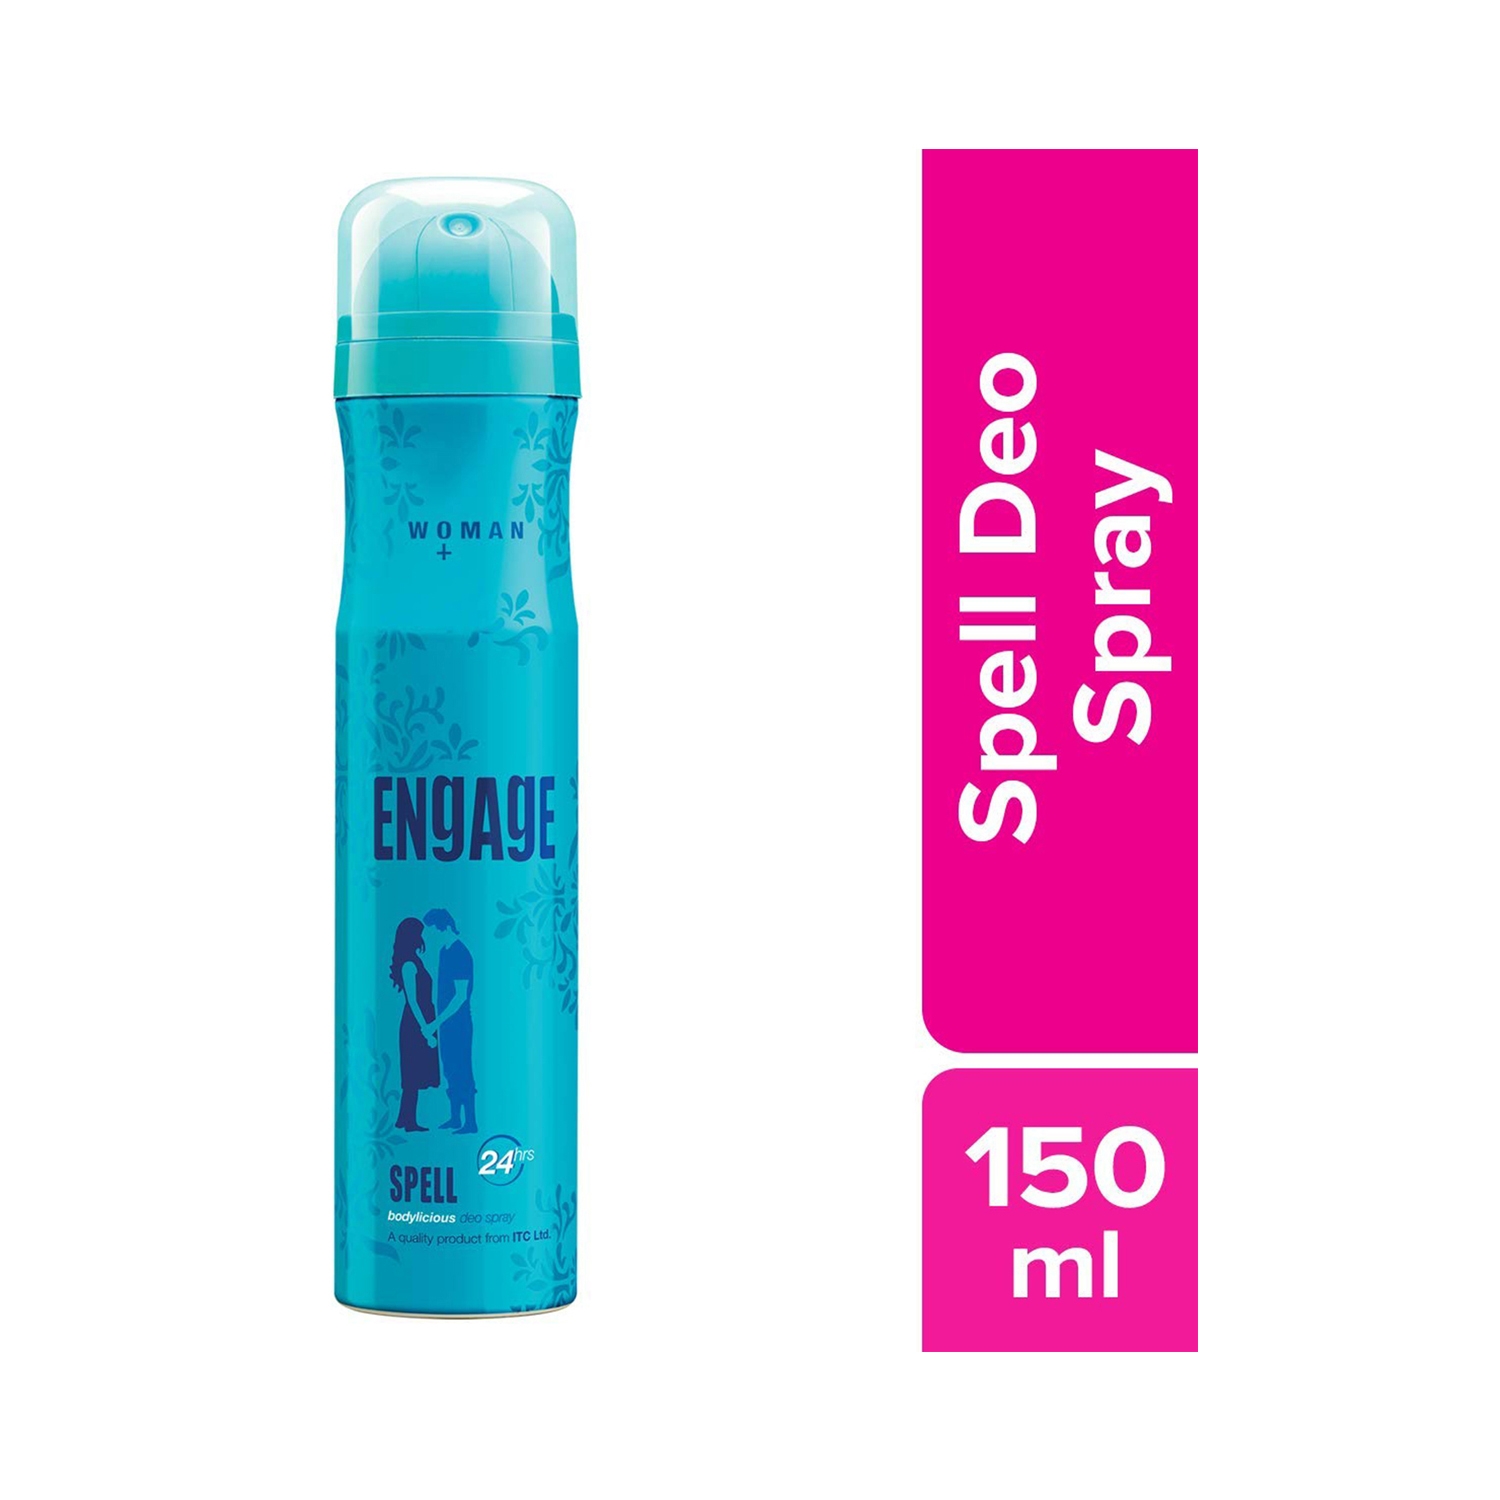 Engage | Engage Spell Deodorant Spray For Women (150ml)